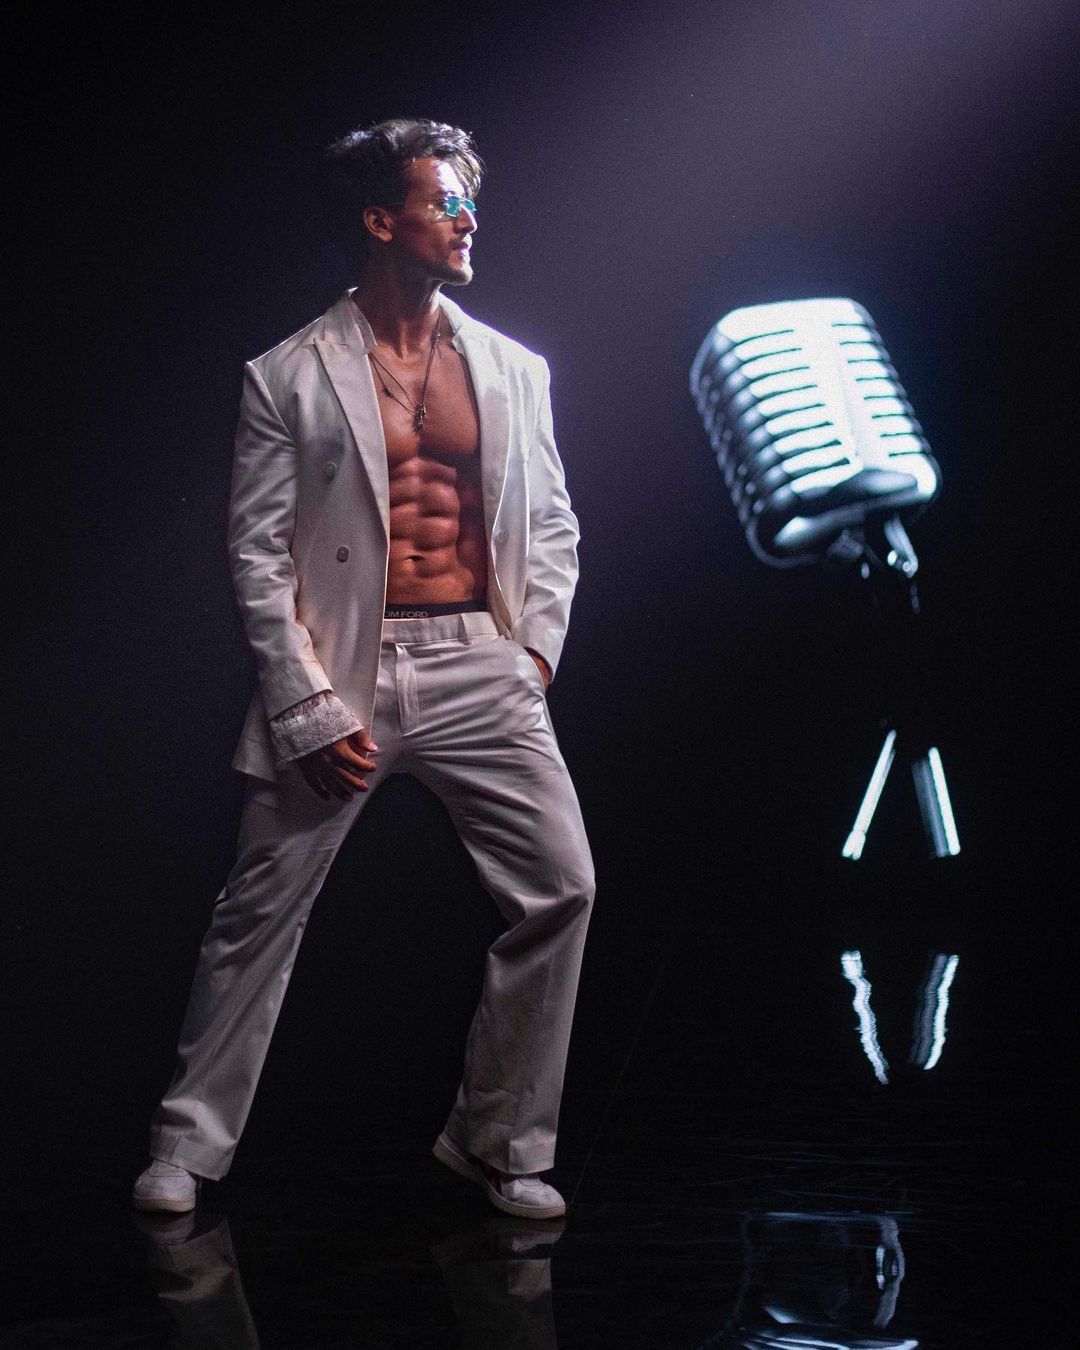 Tiger Shroff Shares A Preview Of His Second Single Casanova; Music Video To Be Out On 13th January